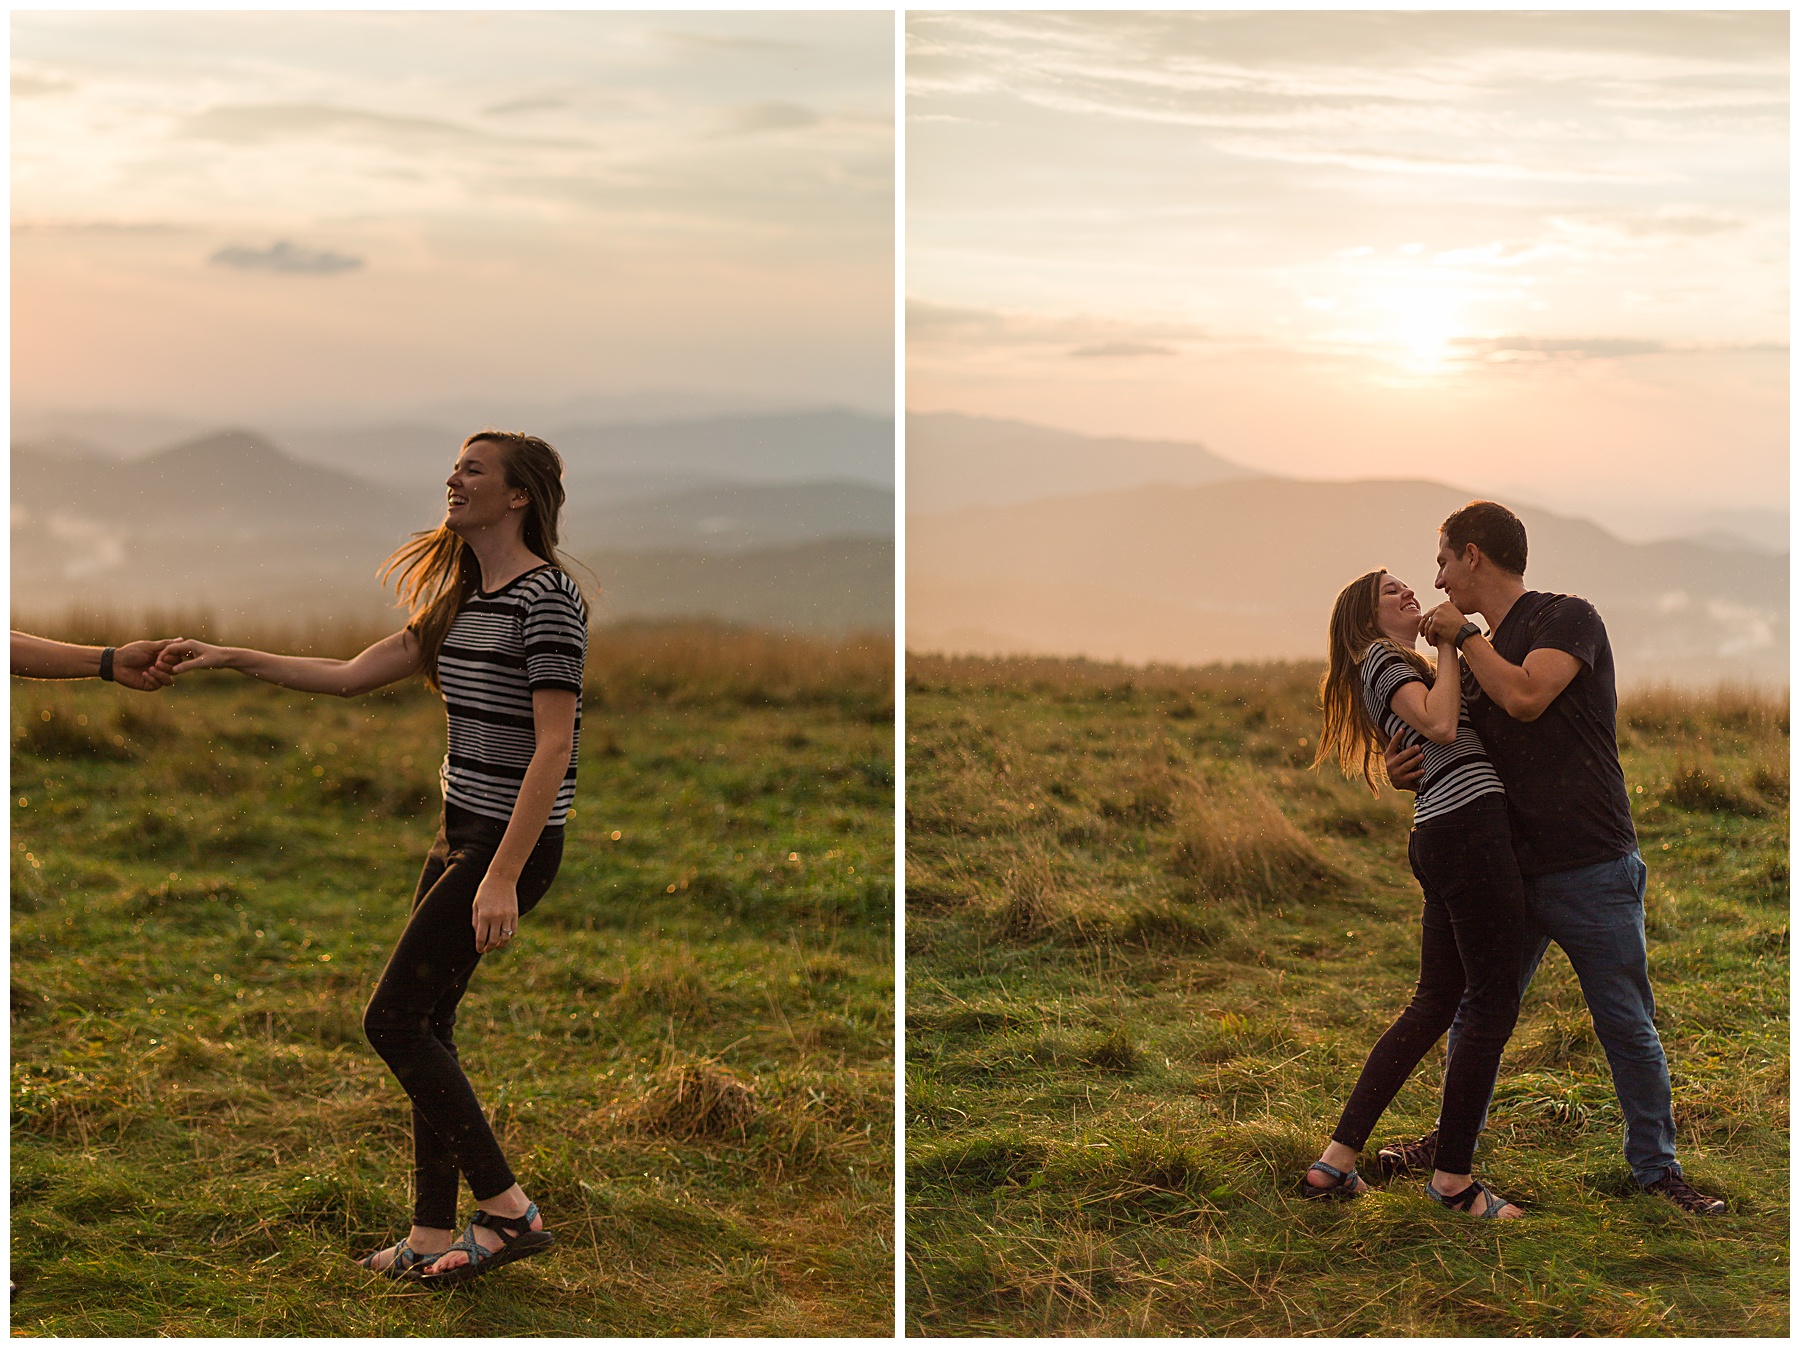 Husband and Wife dancing during sunset on mountain top